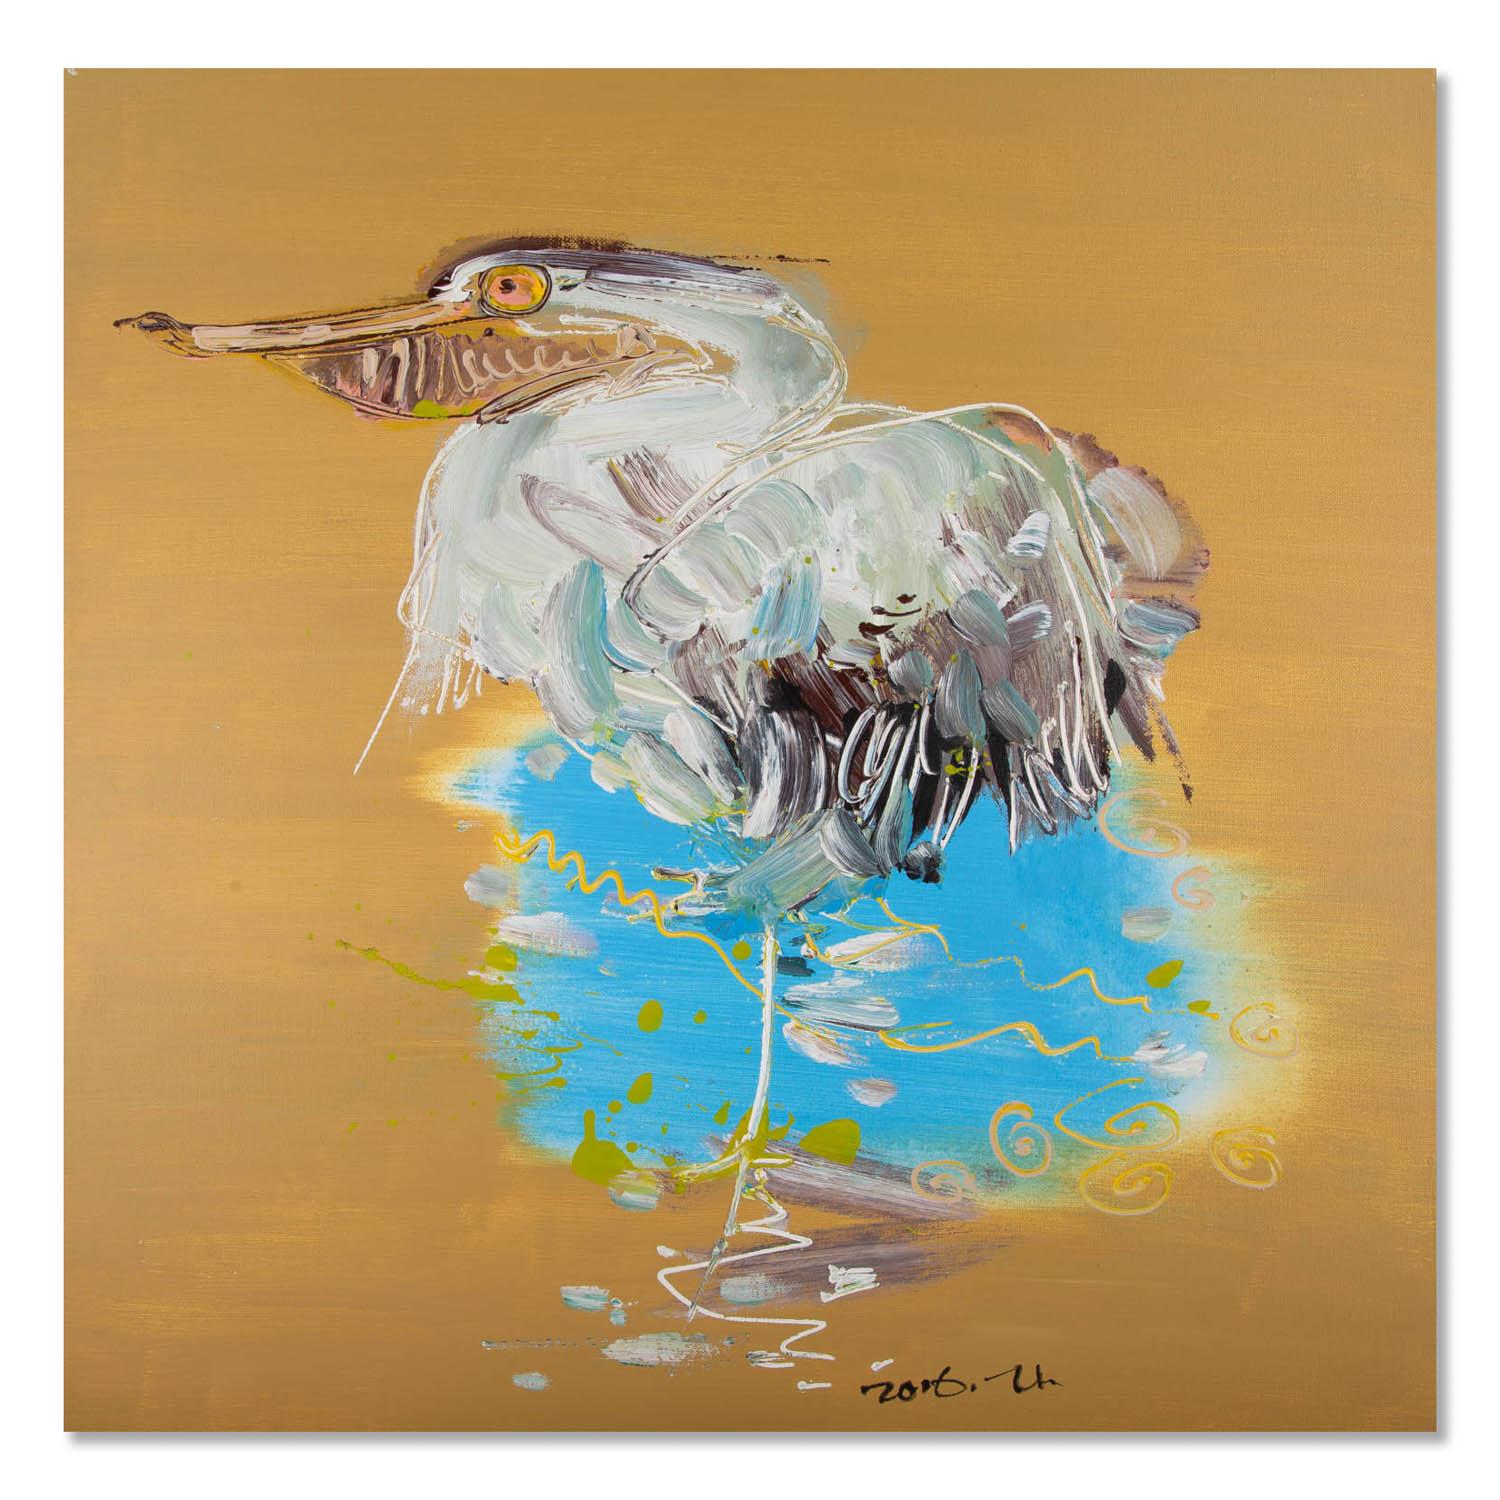  Title: Pelican
 Medium: Oil on canvas
 Size: 29 x 29 inches
 Frame: Framing options available!
 Condition: The painting appears to be in excellent condition.
 
 Year: 2016
 Artist: Xiaochi Tian
 Signature: Signed
 Signature Location: Lower right
